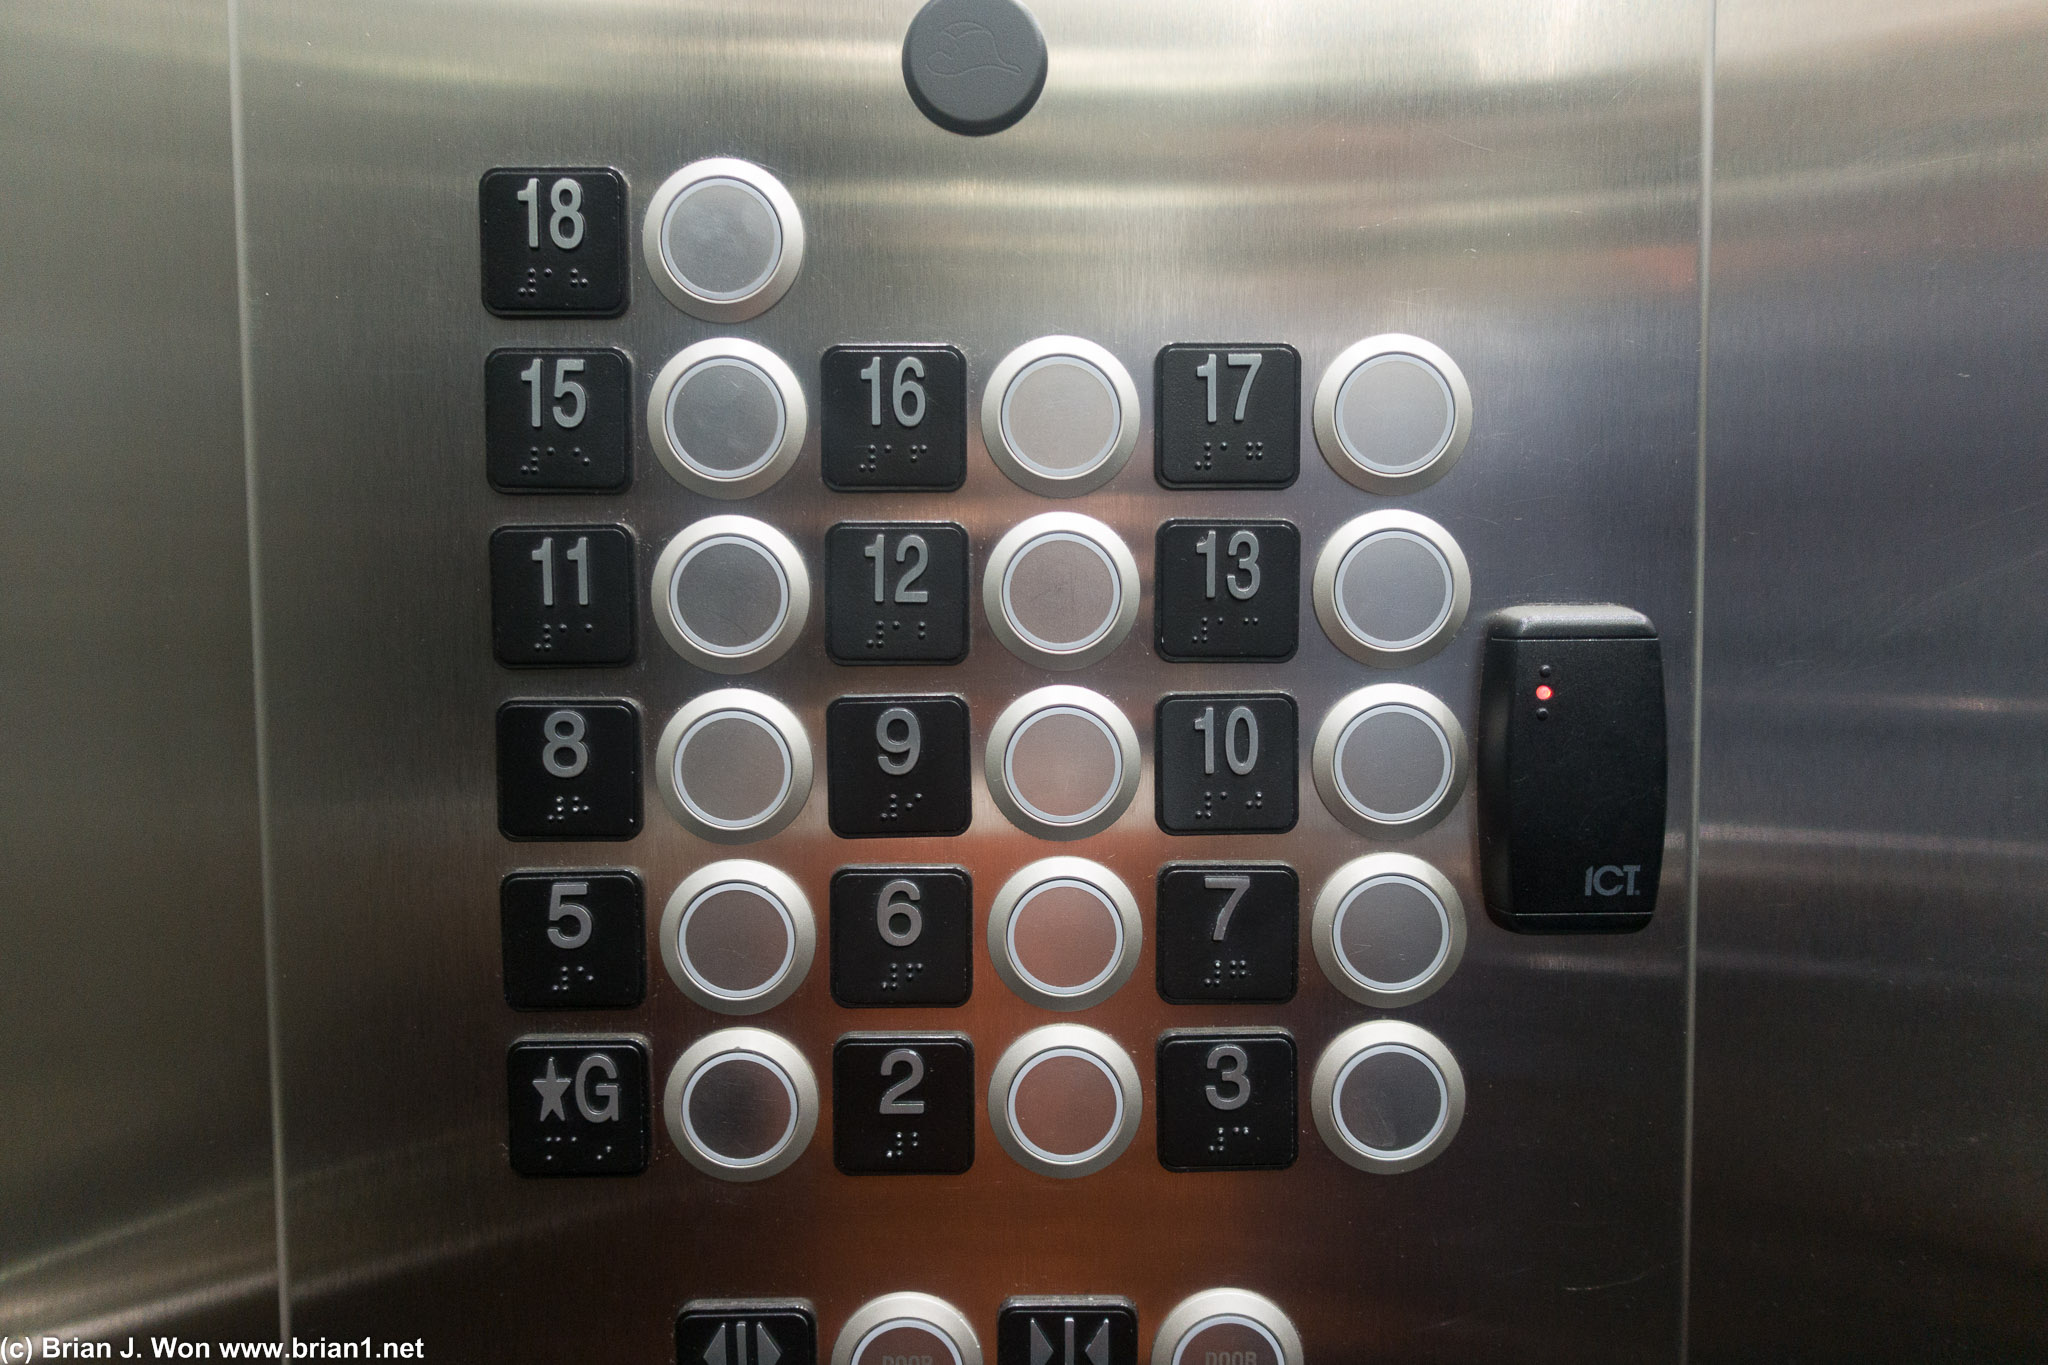 You know you're in a Chinese-dominated building when there's no floors with the number 4.